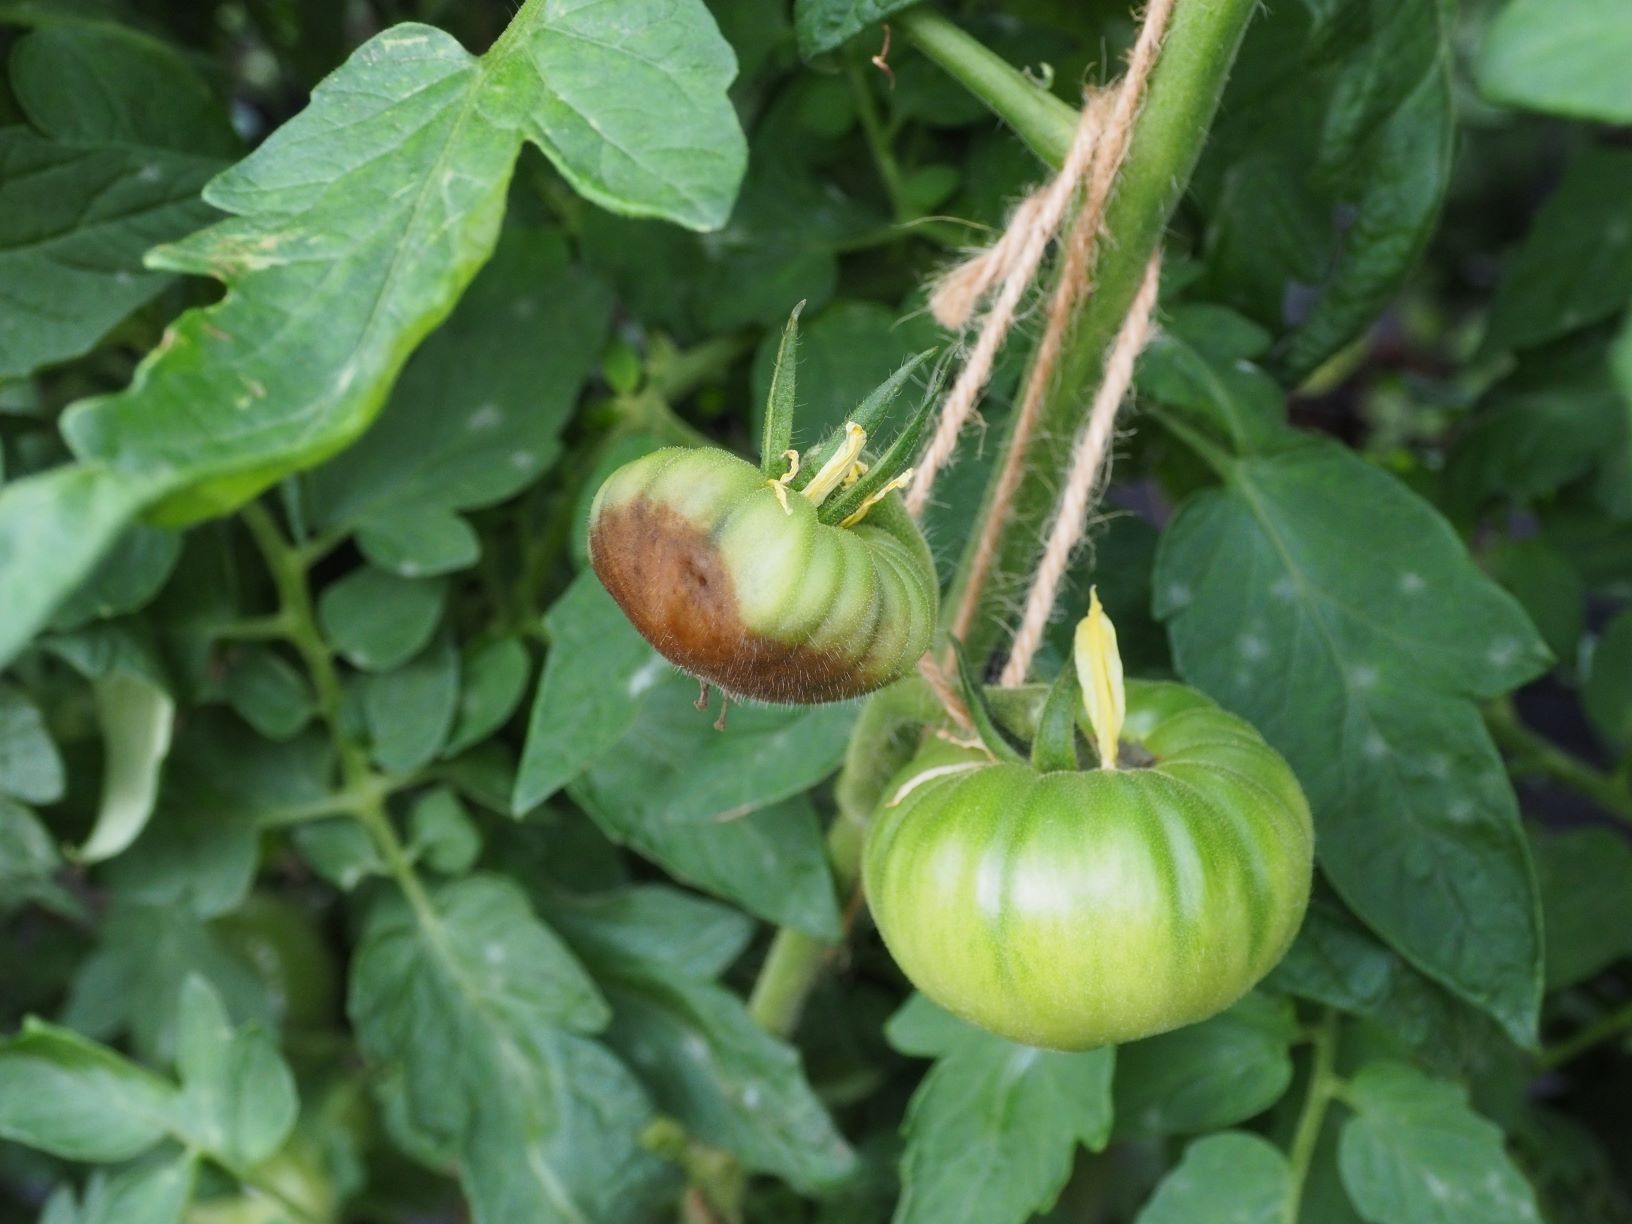 Calcium nutrient deficiency, blossom end rot of tomato